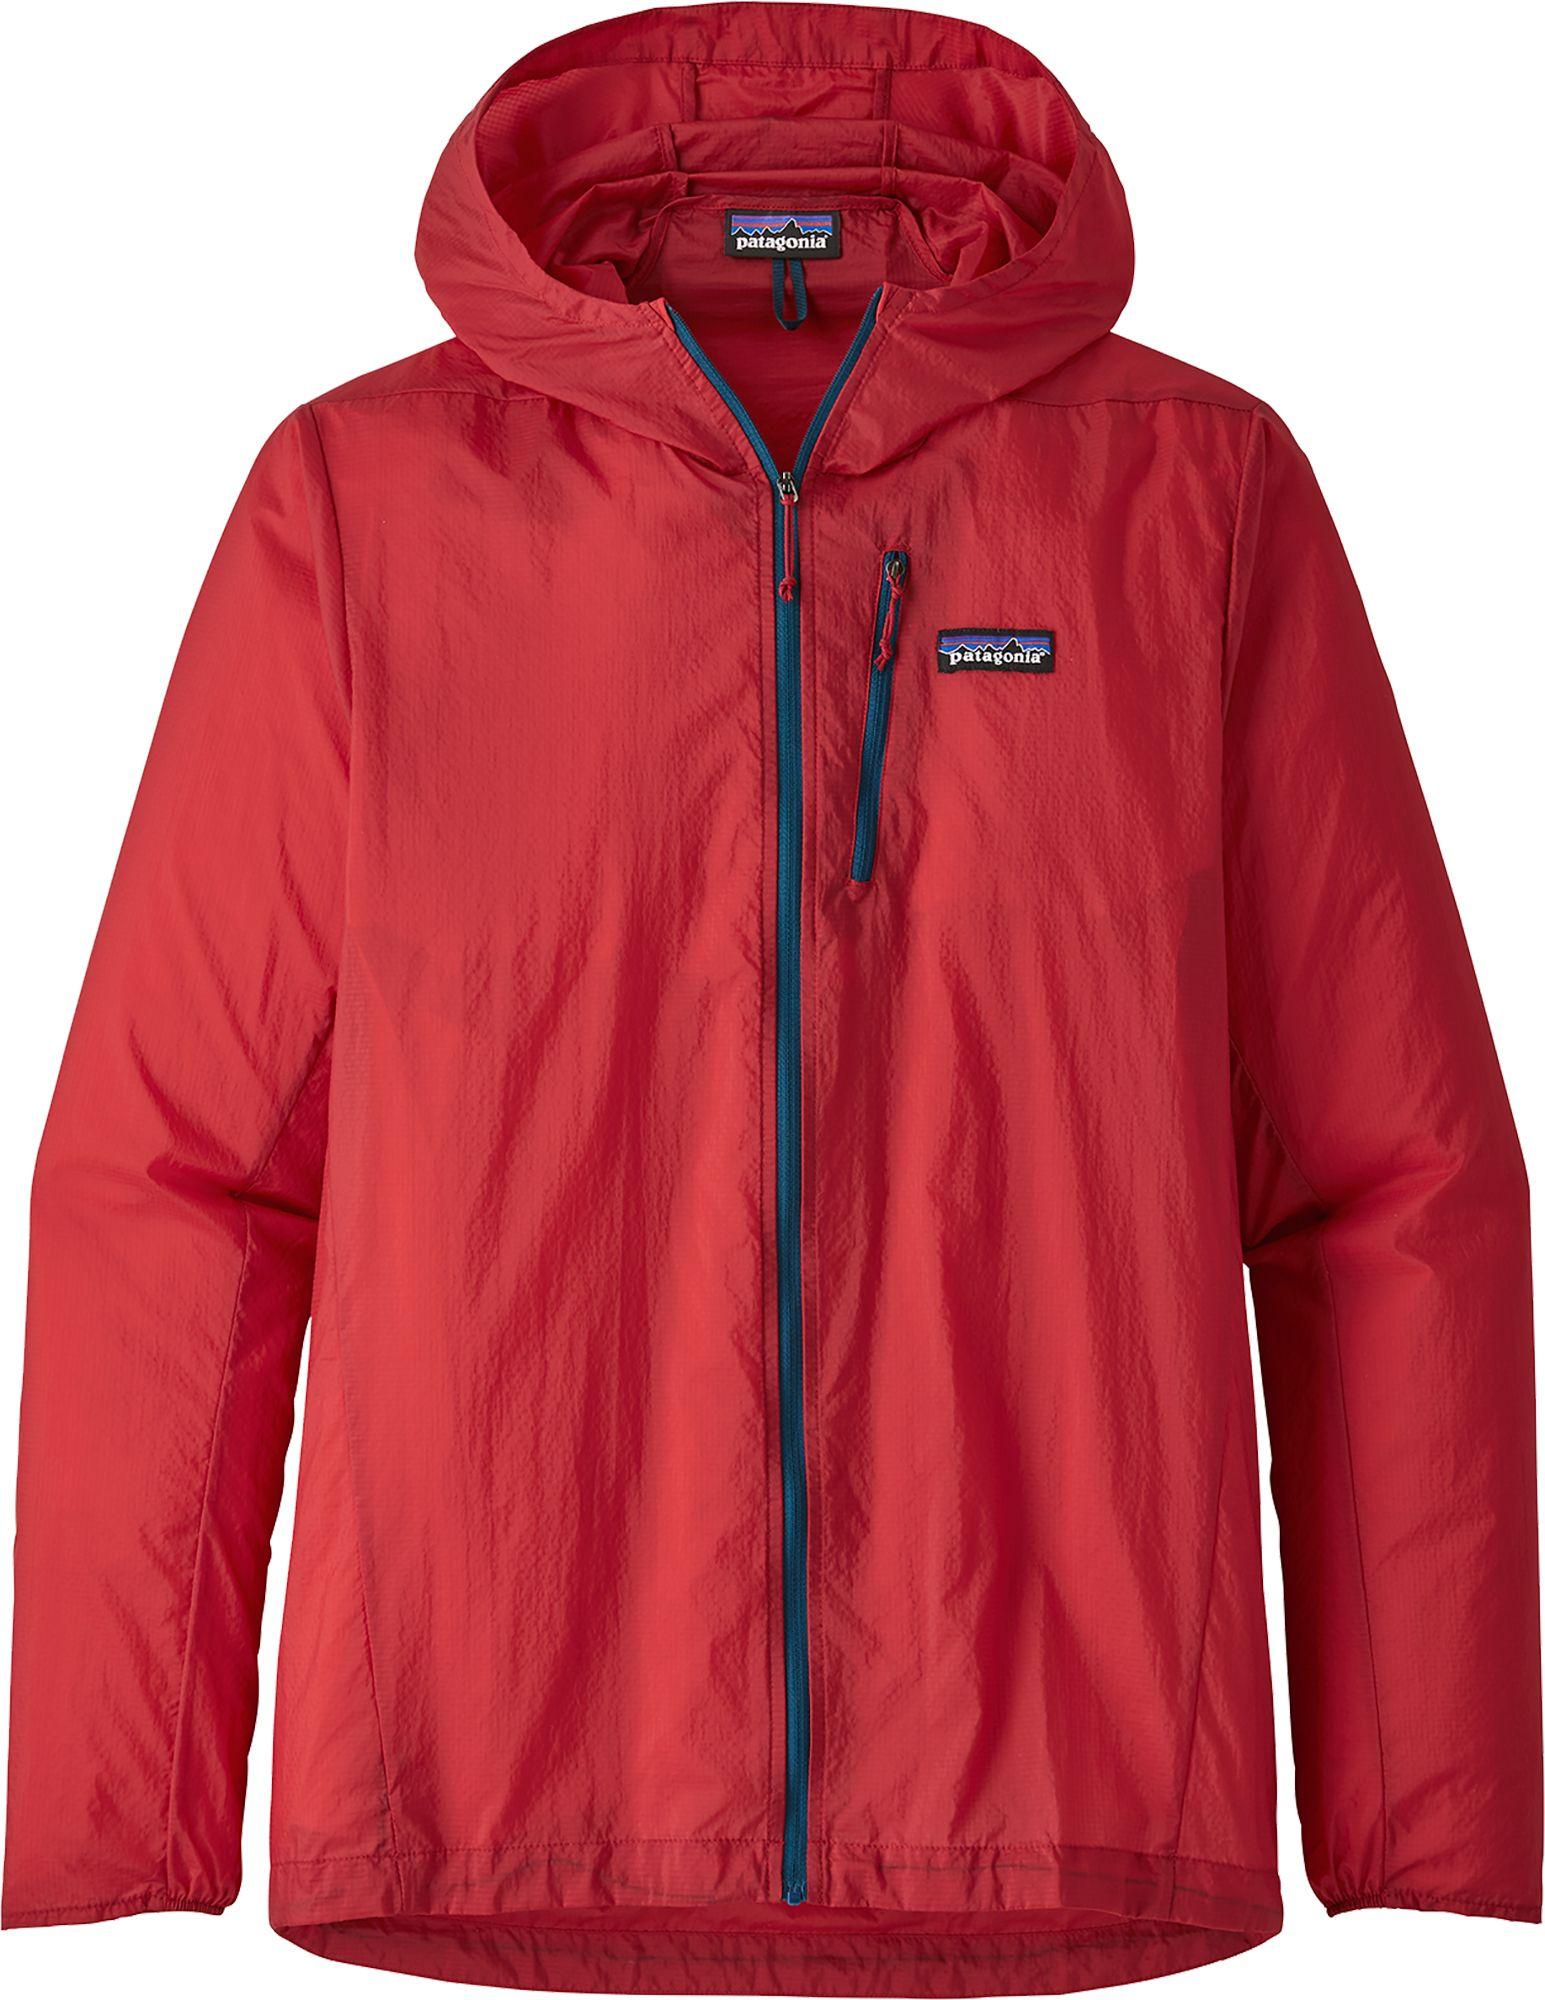 Patagonia Synthetic Houdini Jacket in Red for Men - Lyst